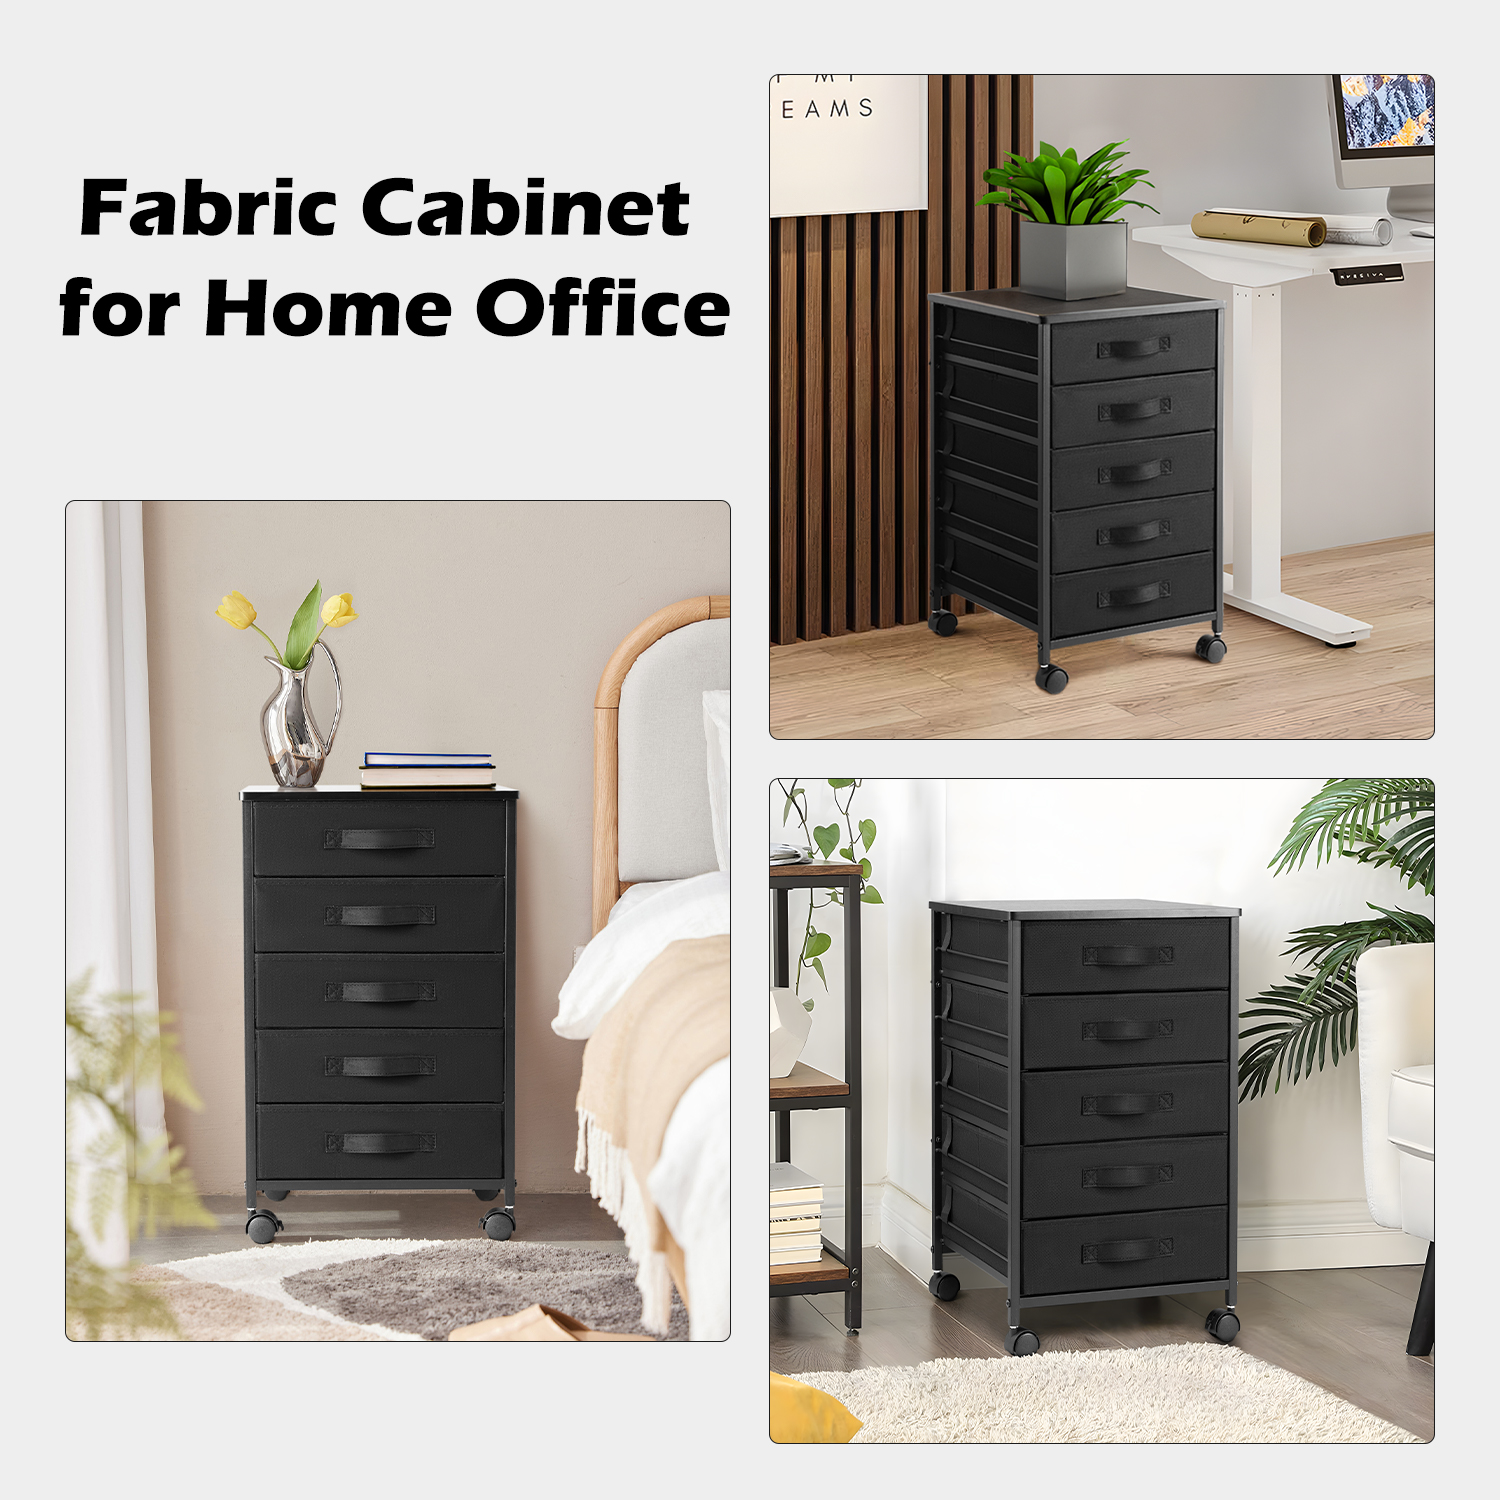 TOPSKY 5 Drawers Mobile Cabinet, Fabric Storage Tower with Anti-Drop Drawers for Home Office BC-002